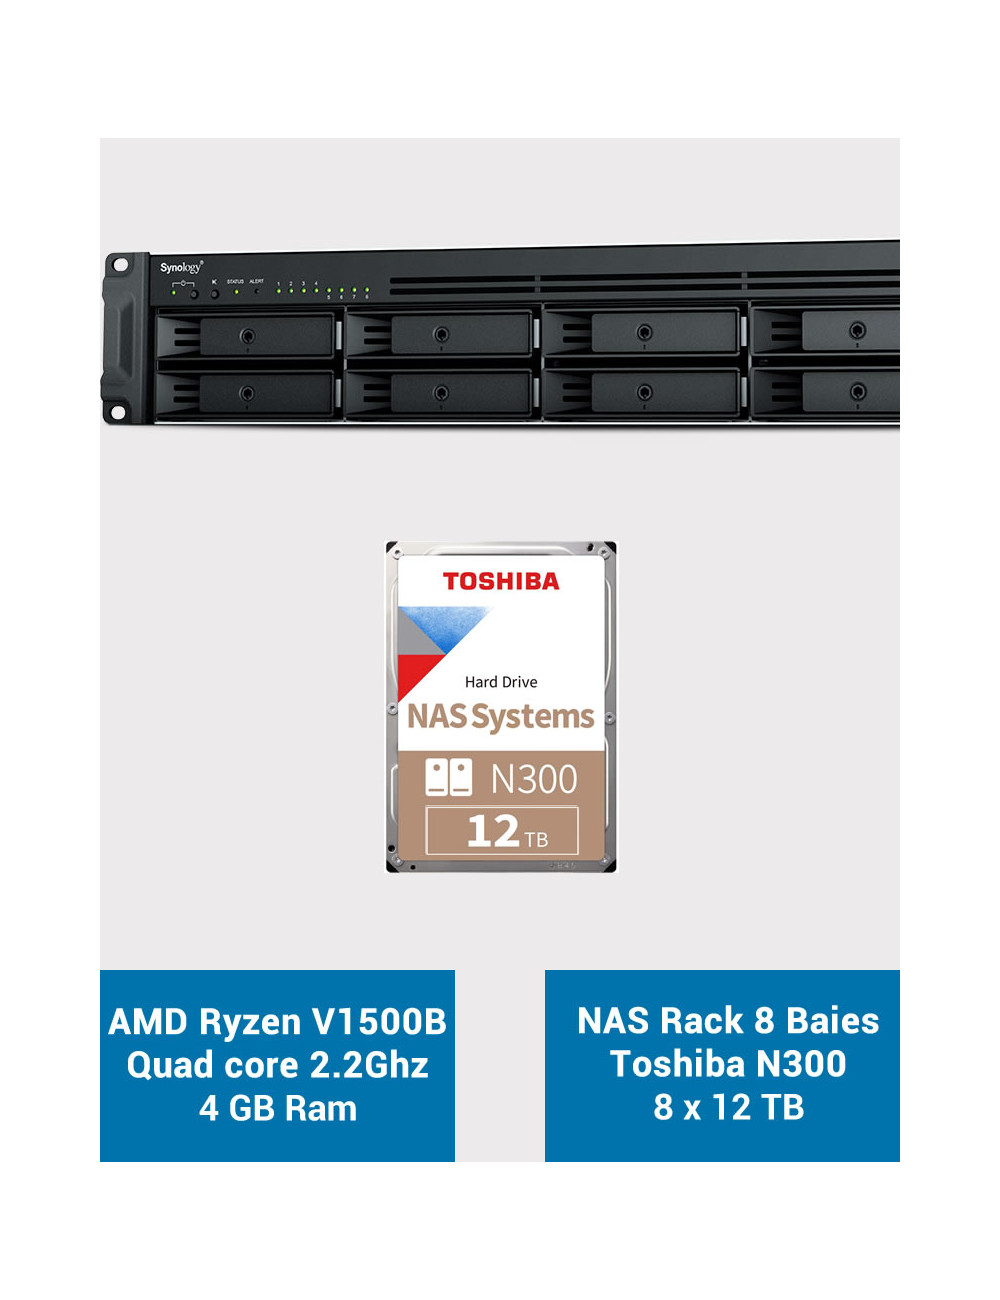 Synology RS1221+ Serveur NAS Rack Toshiba N300 96To (8x12To)